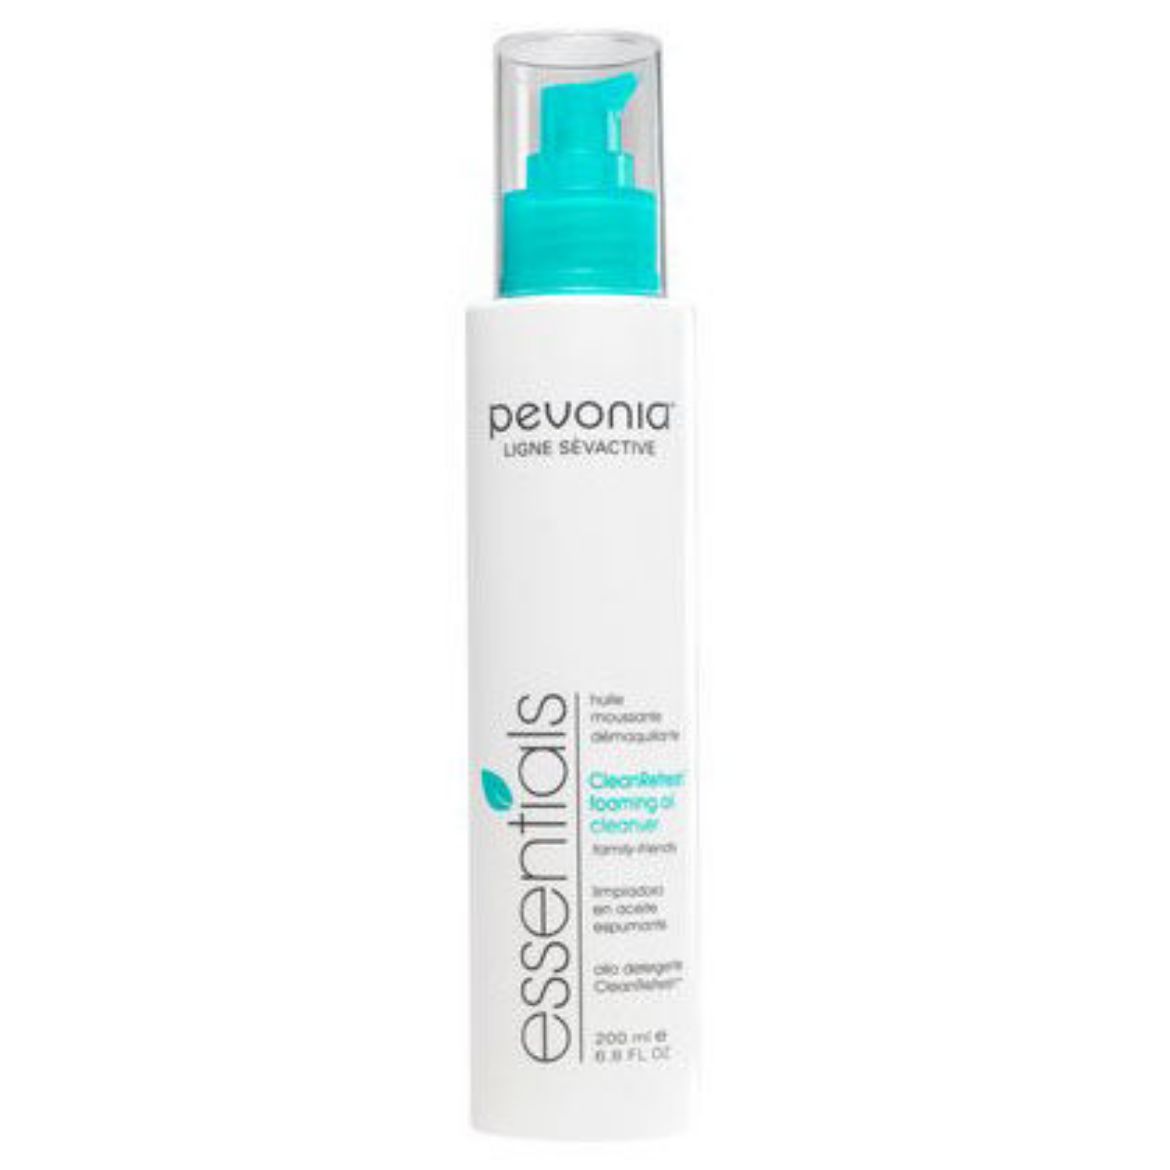 Image of Pevonia CleanRefresh Foaming Oil Cleanser (200ml)